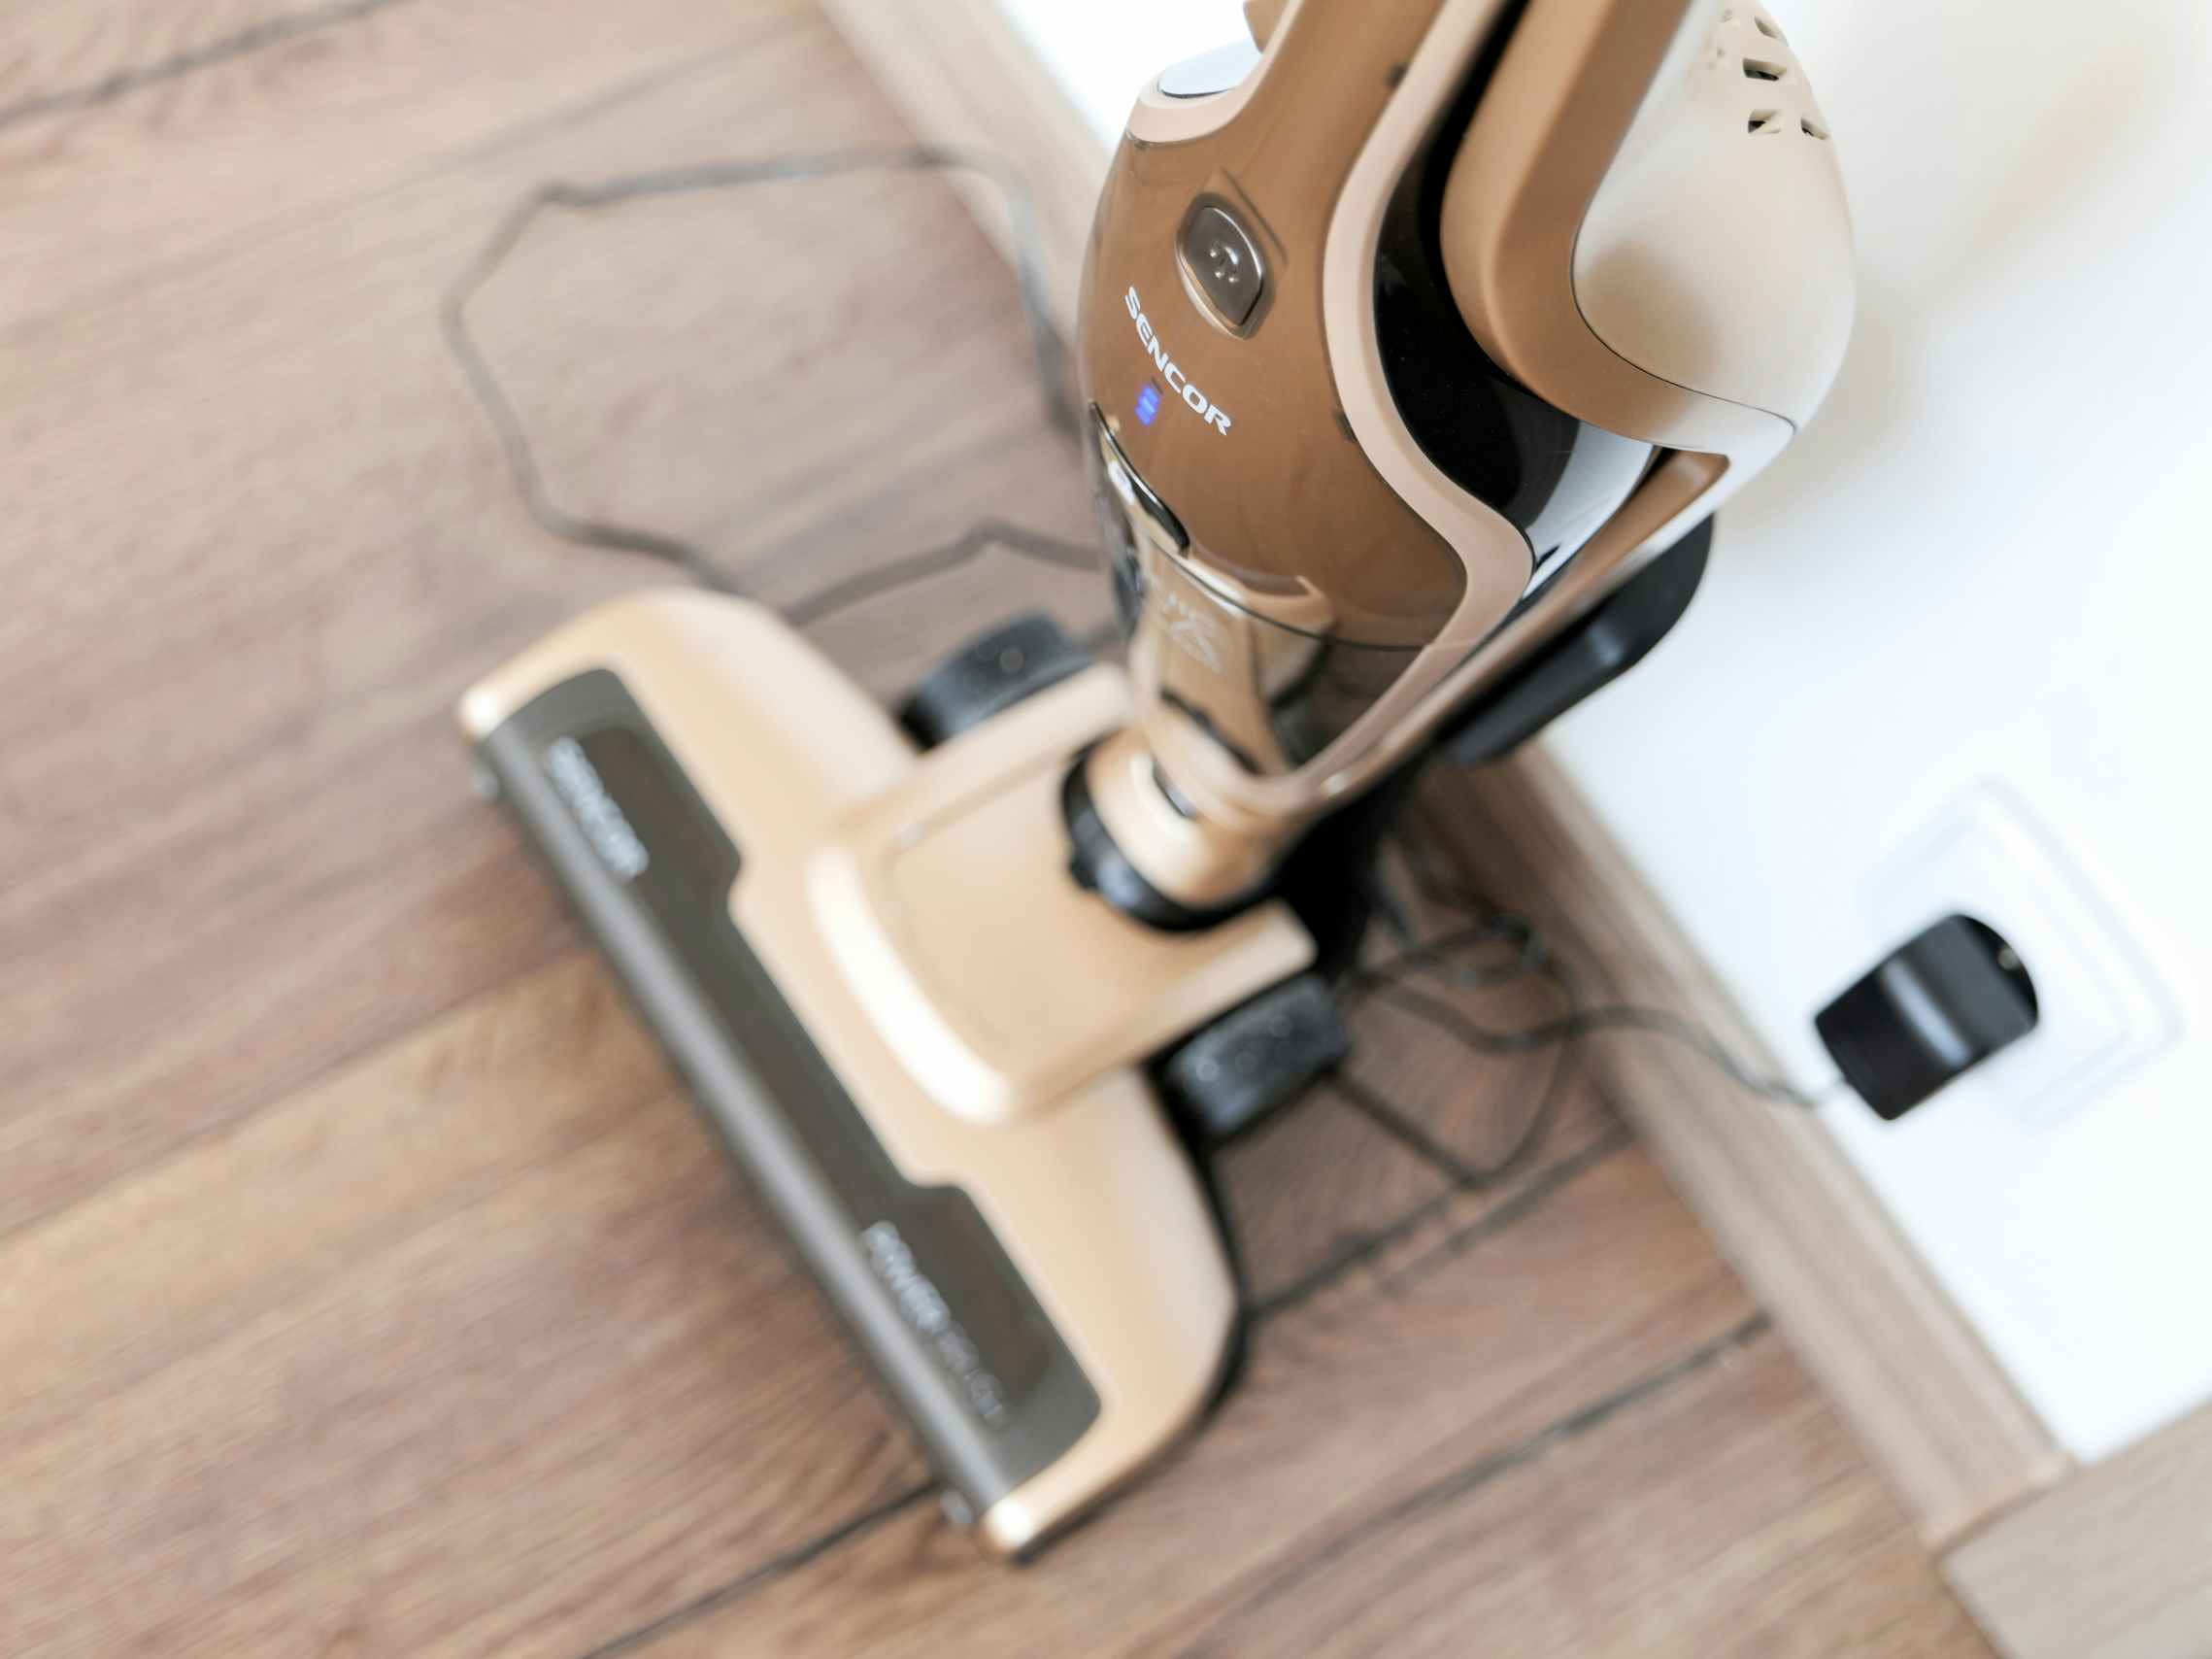 A cordless vacuum plugged into a wall to charge